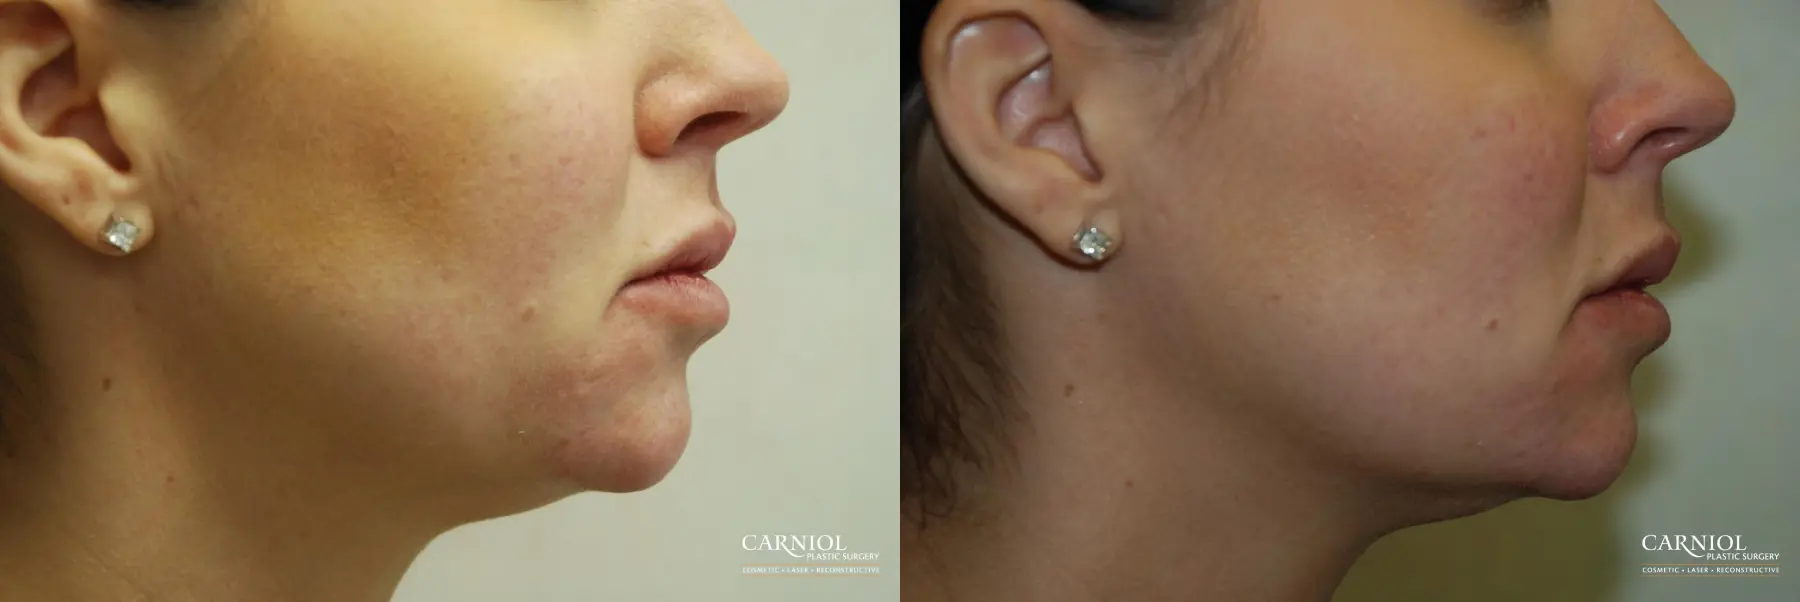 Facial Tightening: Patient 4 - Before and After  